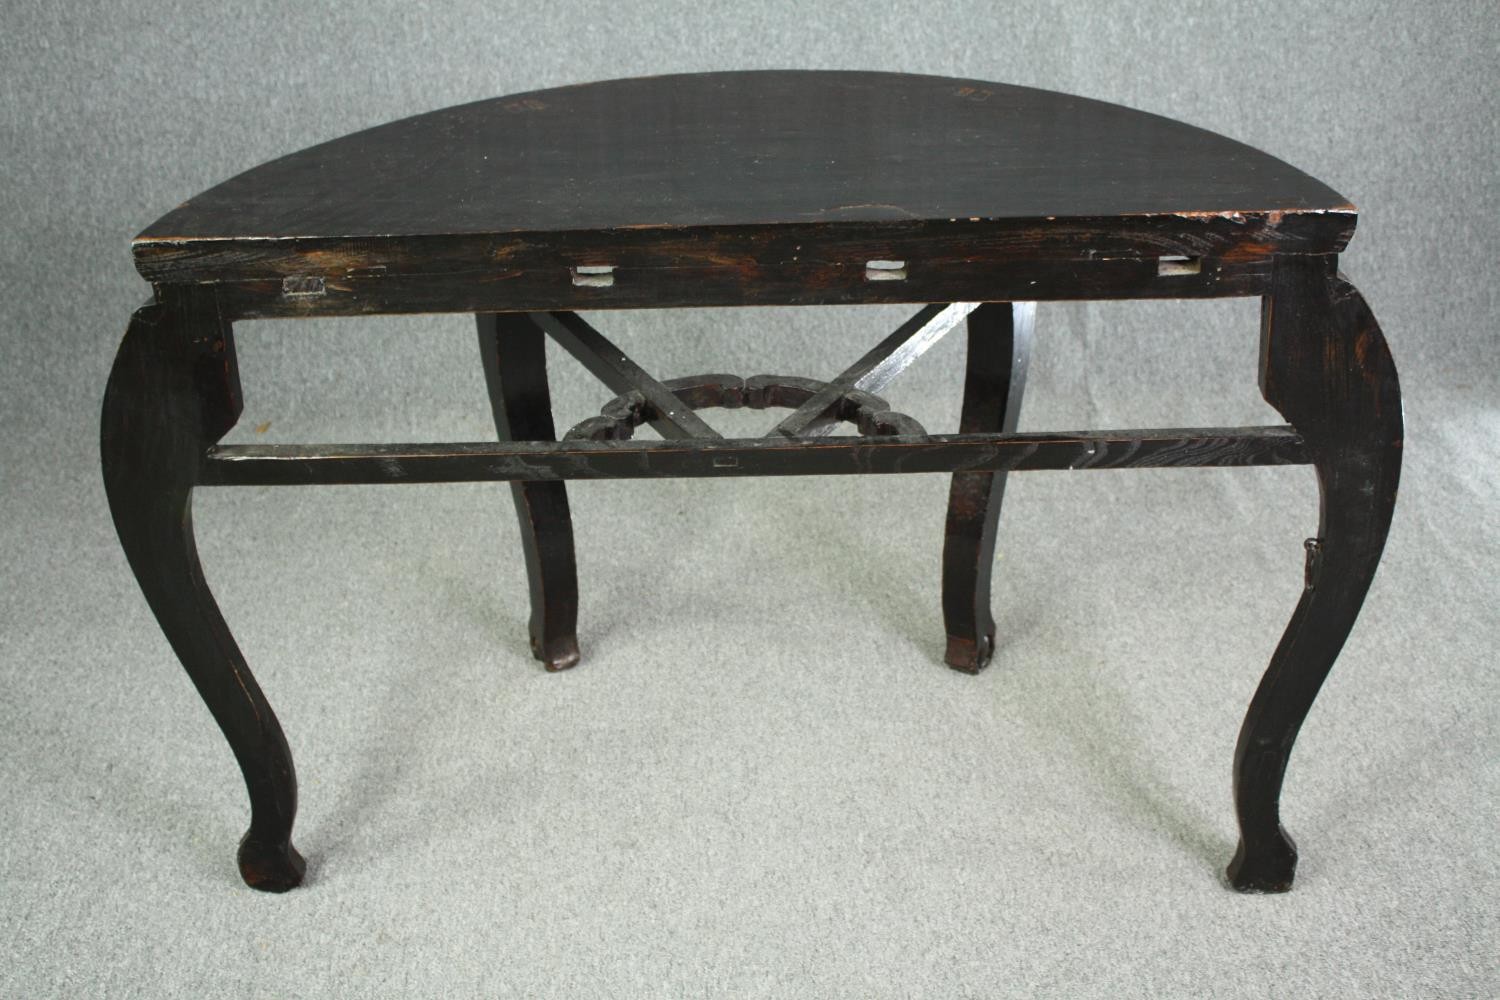 A substantial Chinese lacquered hardwood console table, possibly 19th century. H.84 W.120 D.59cm. - Image 12 of 13